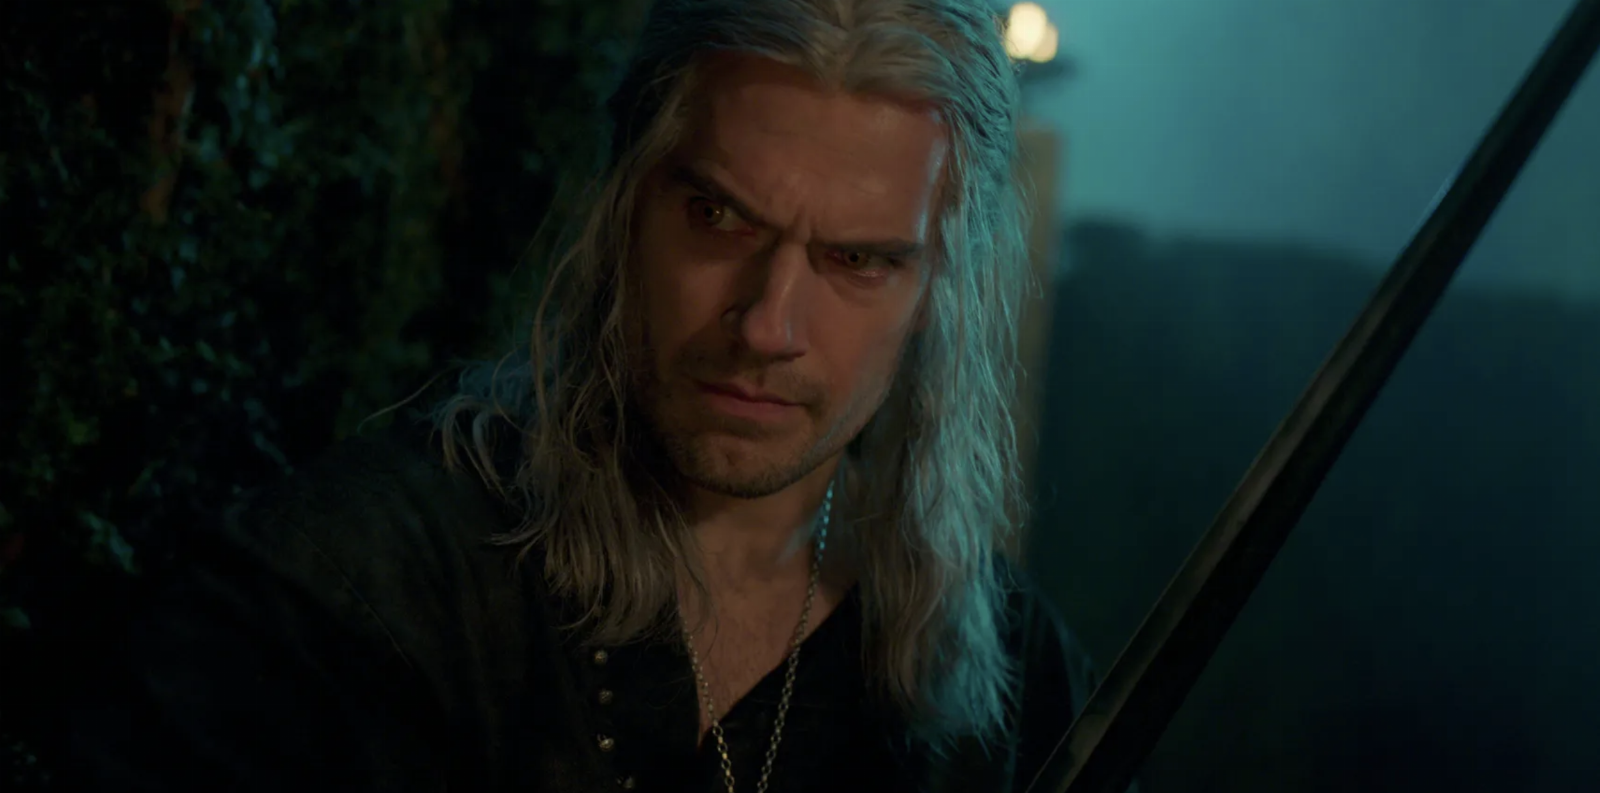 ‘The Witcher’ season 3 will debut this summer in two parts